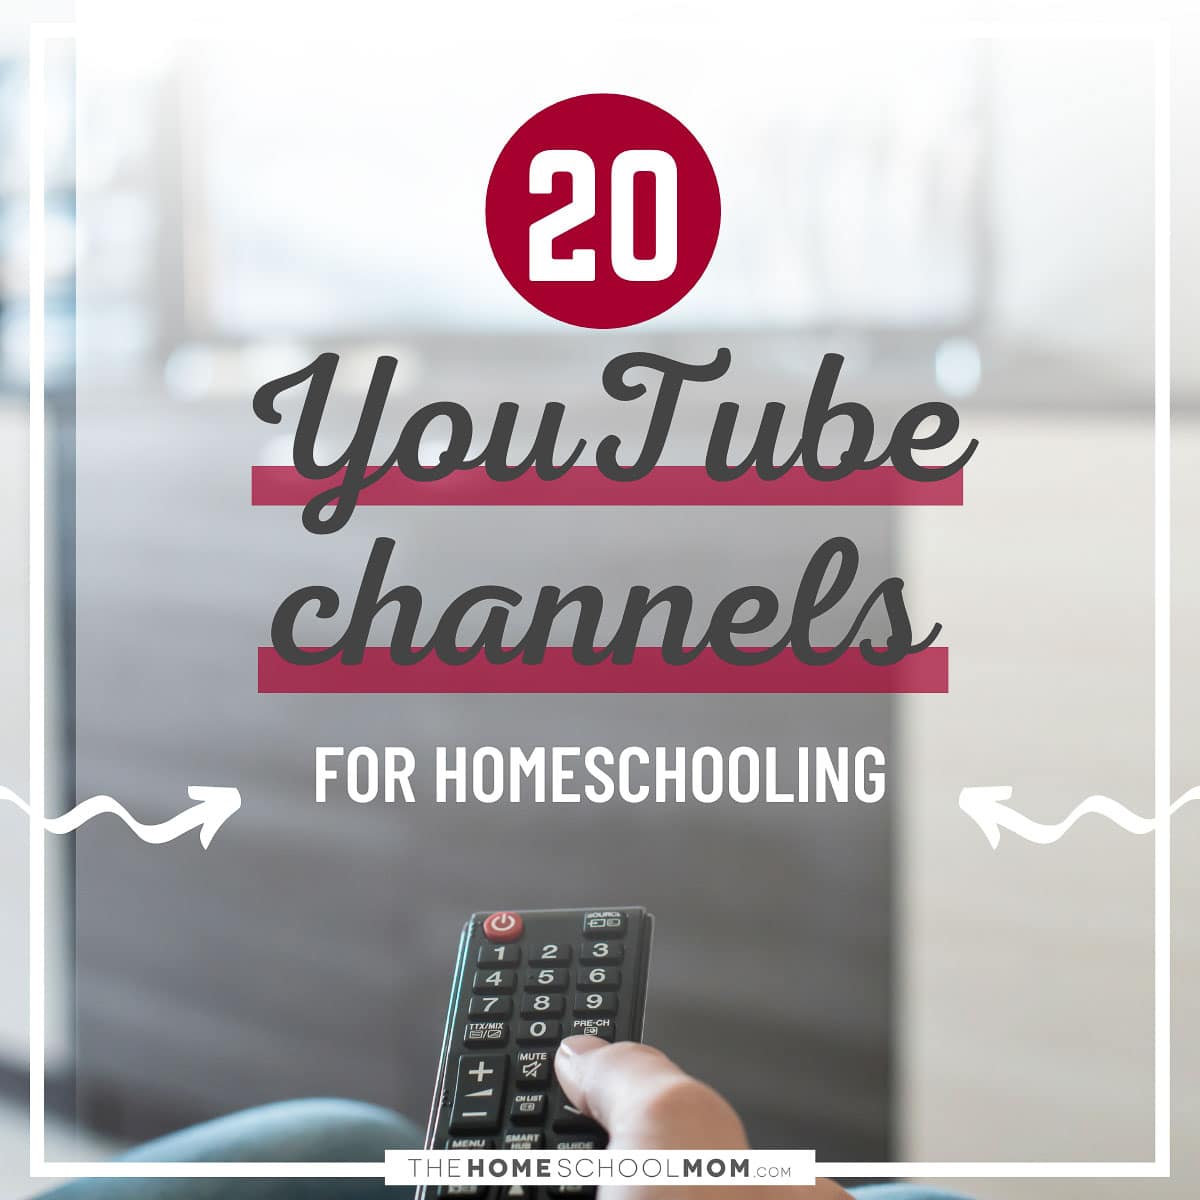 20 YouTube channels for homeschooling.